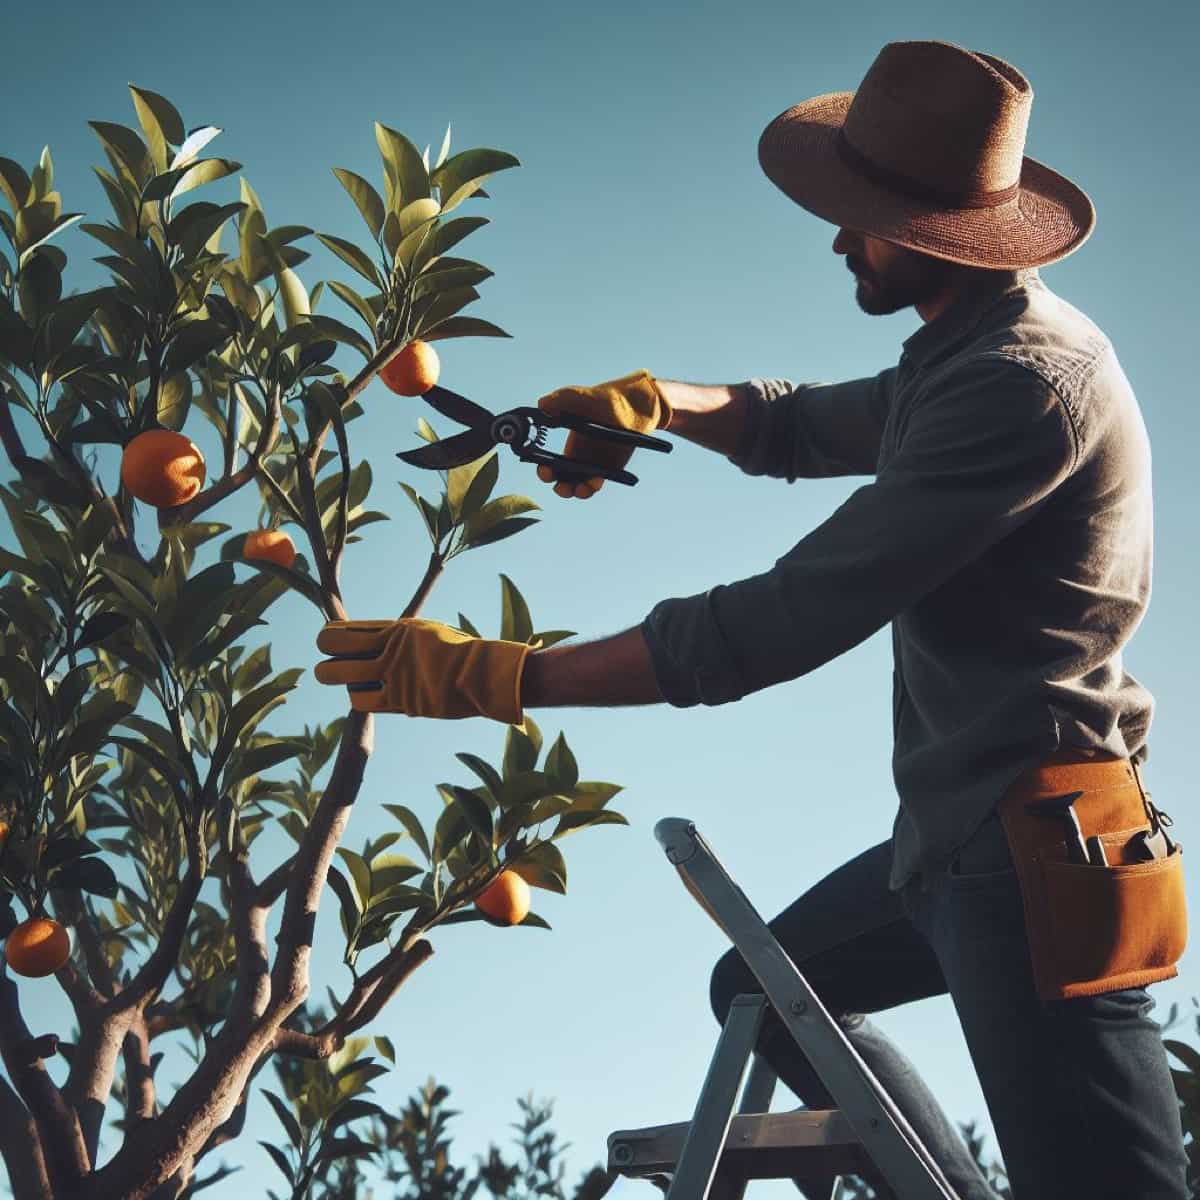 How to Prune Citrus Trees in 10 Easy Steps